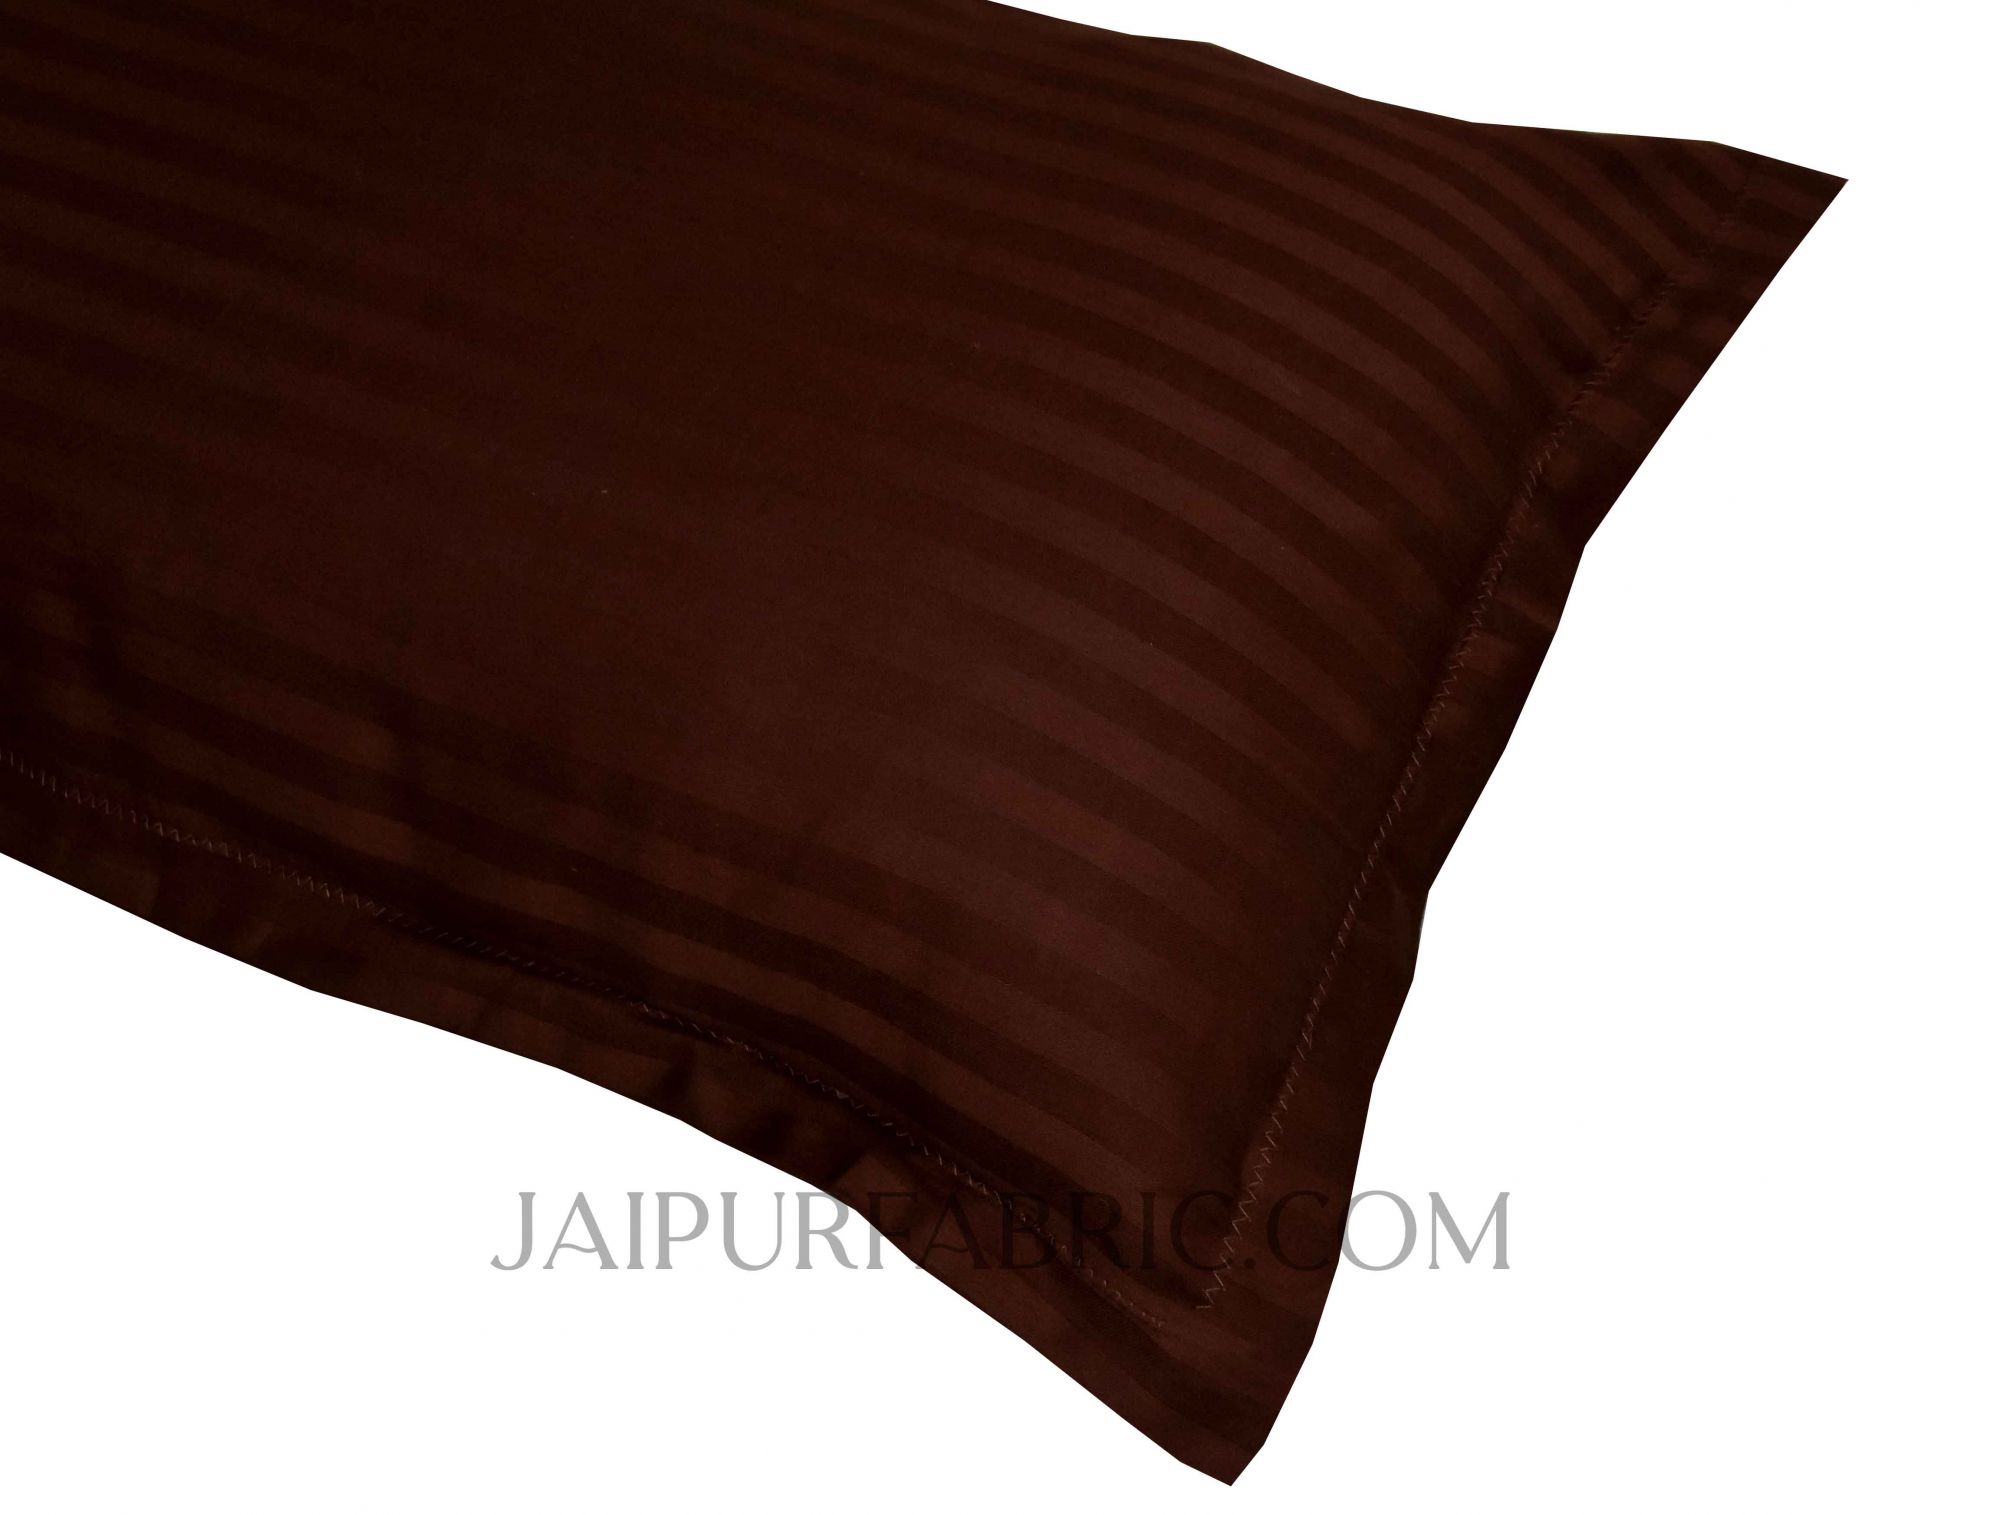 Brown Color Pillow Cover Pair